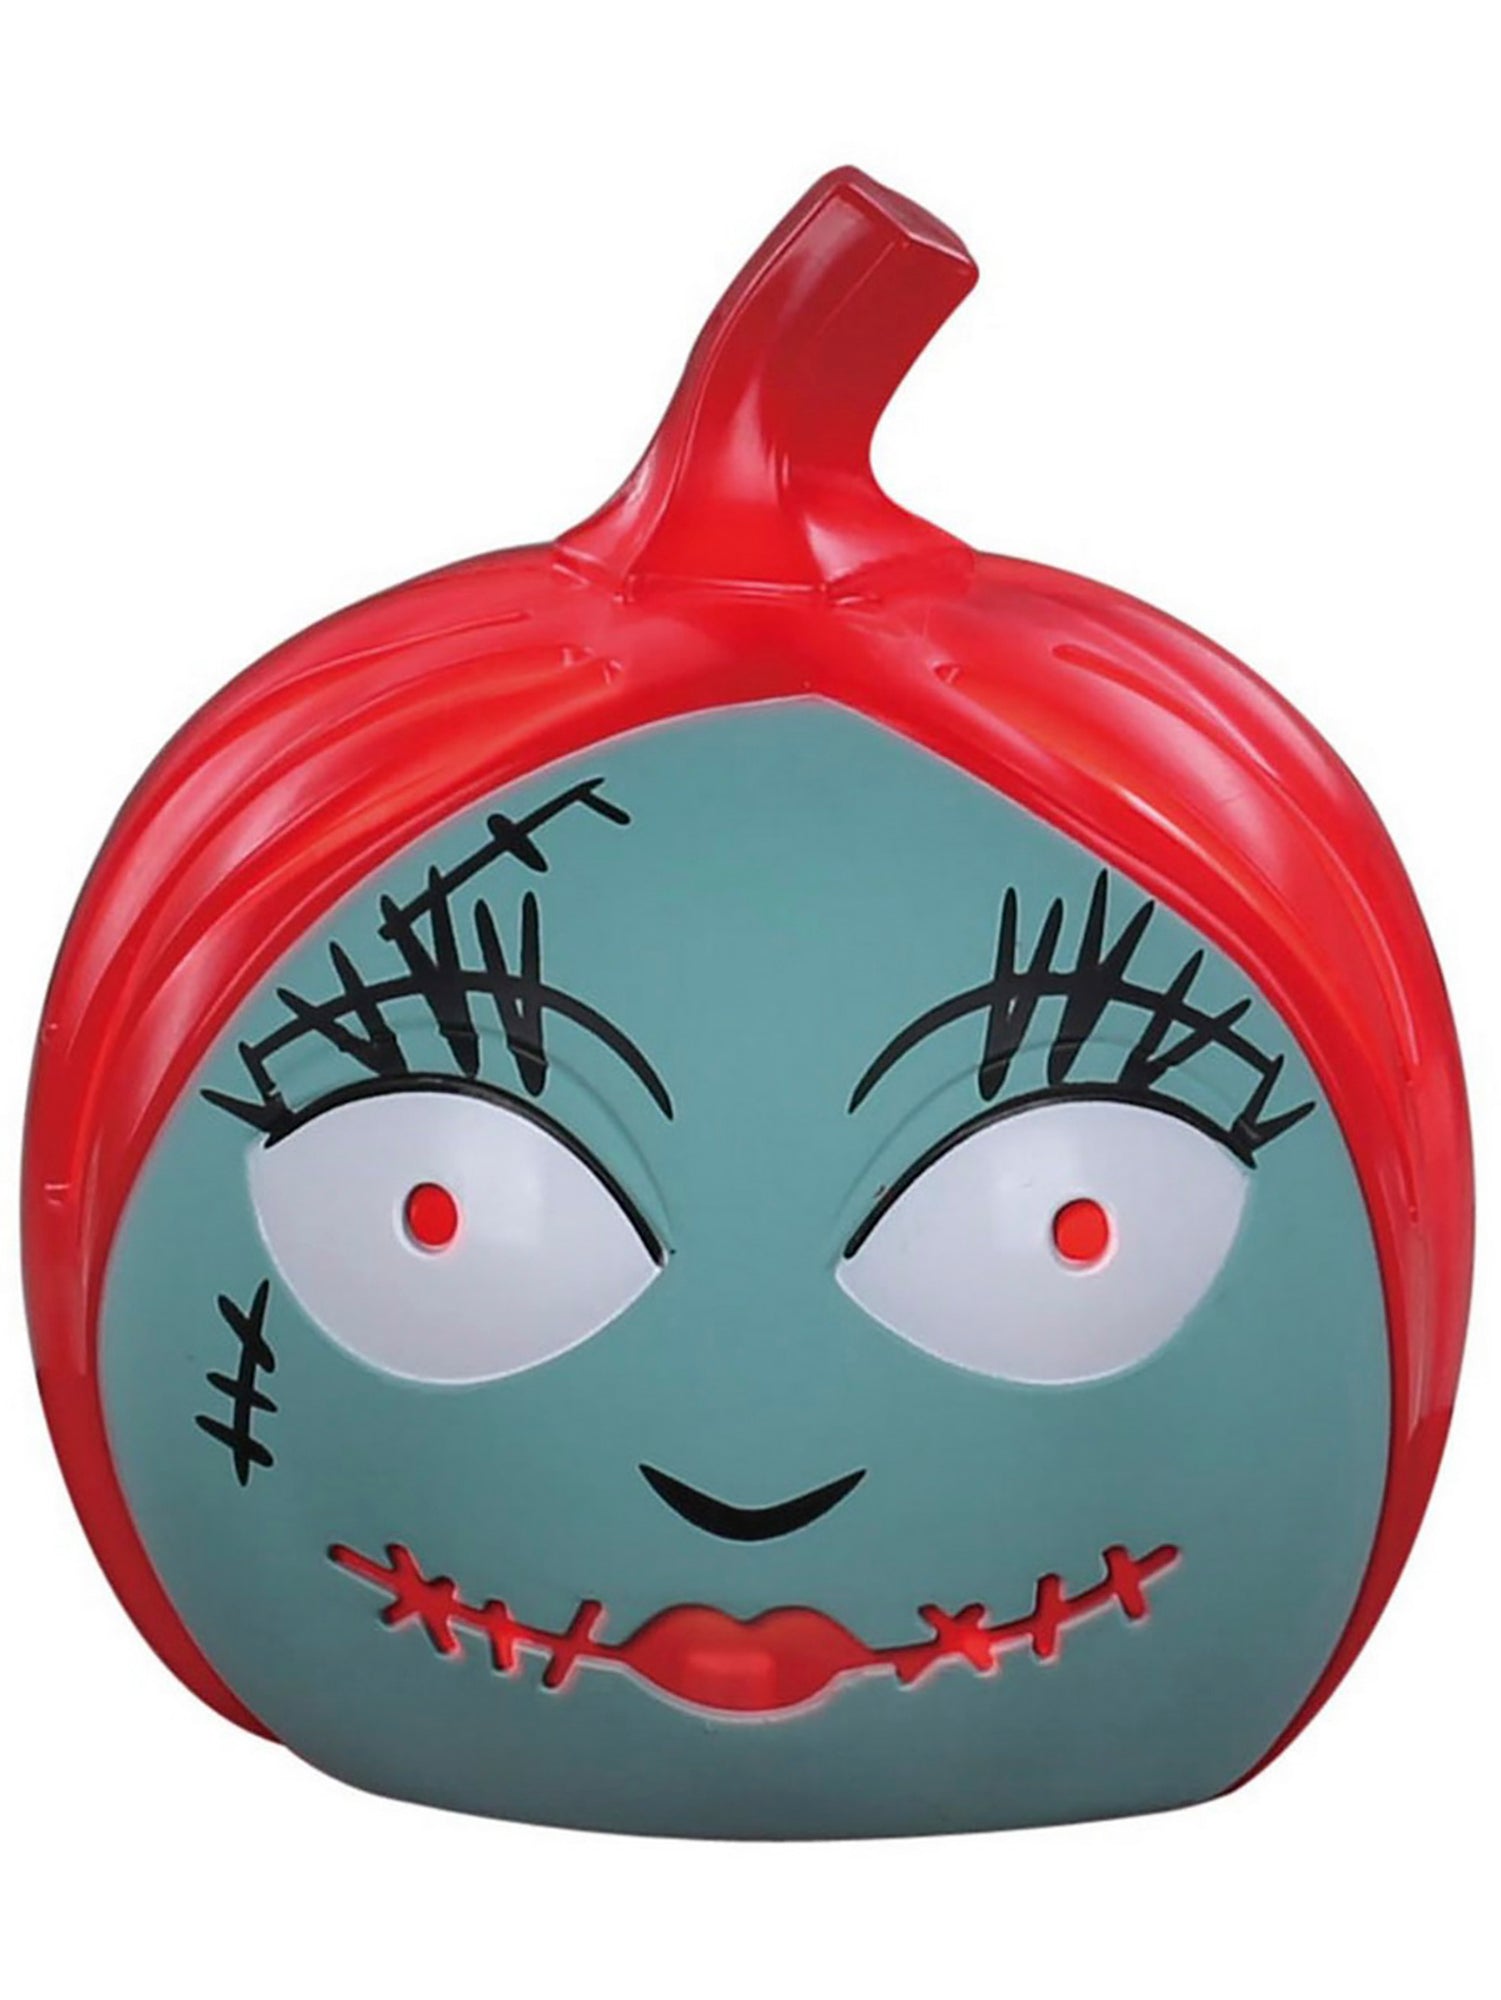 3.25 Inch The Nightmare Before Christmas 3 Character Assortment Light Up Pumpkin - costumes.com